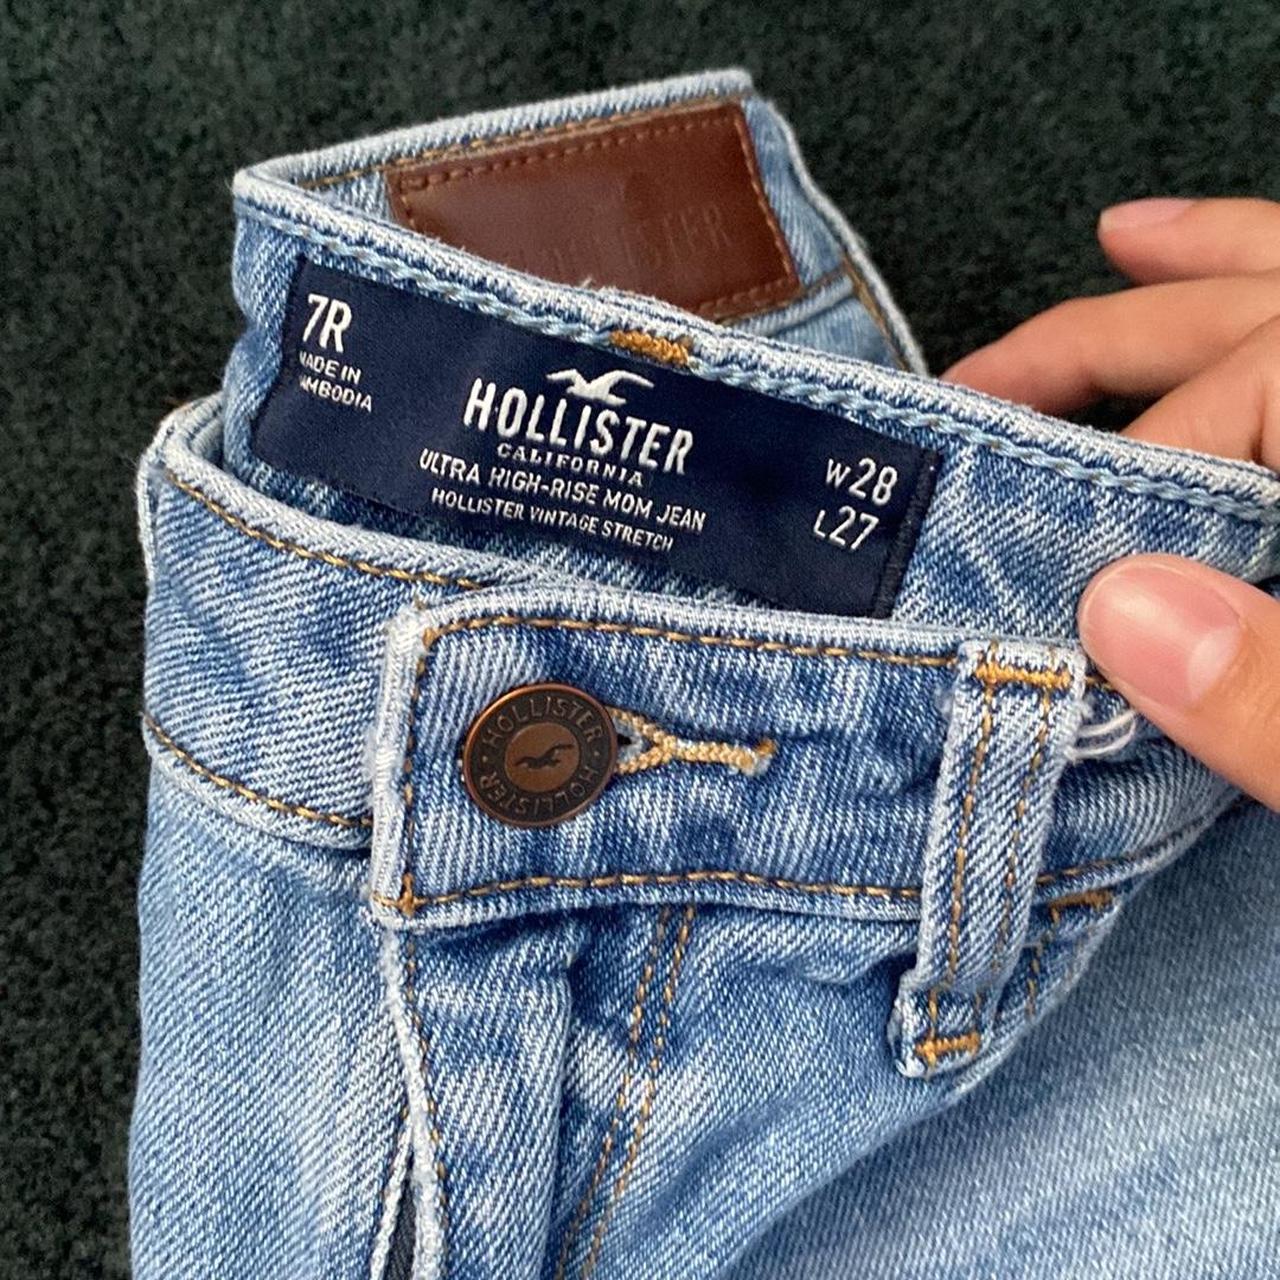 Hollister Ultra High Rise Mom Jean, Size 7R , Don’t